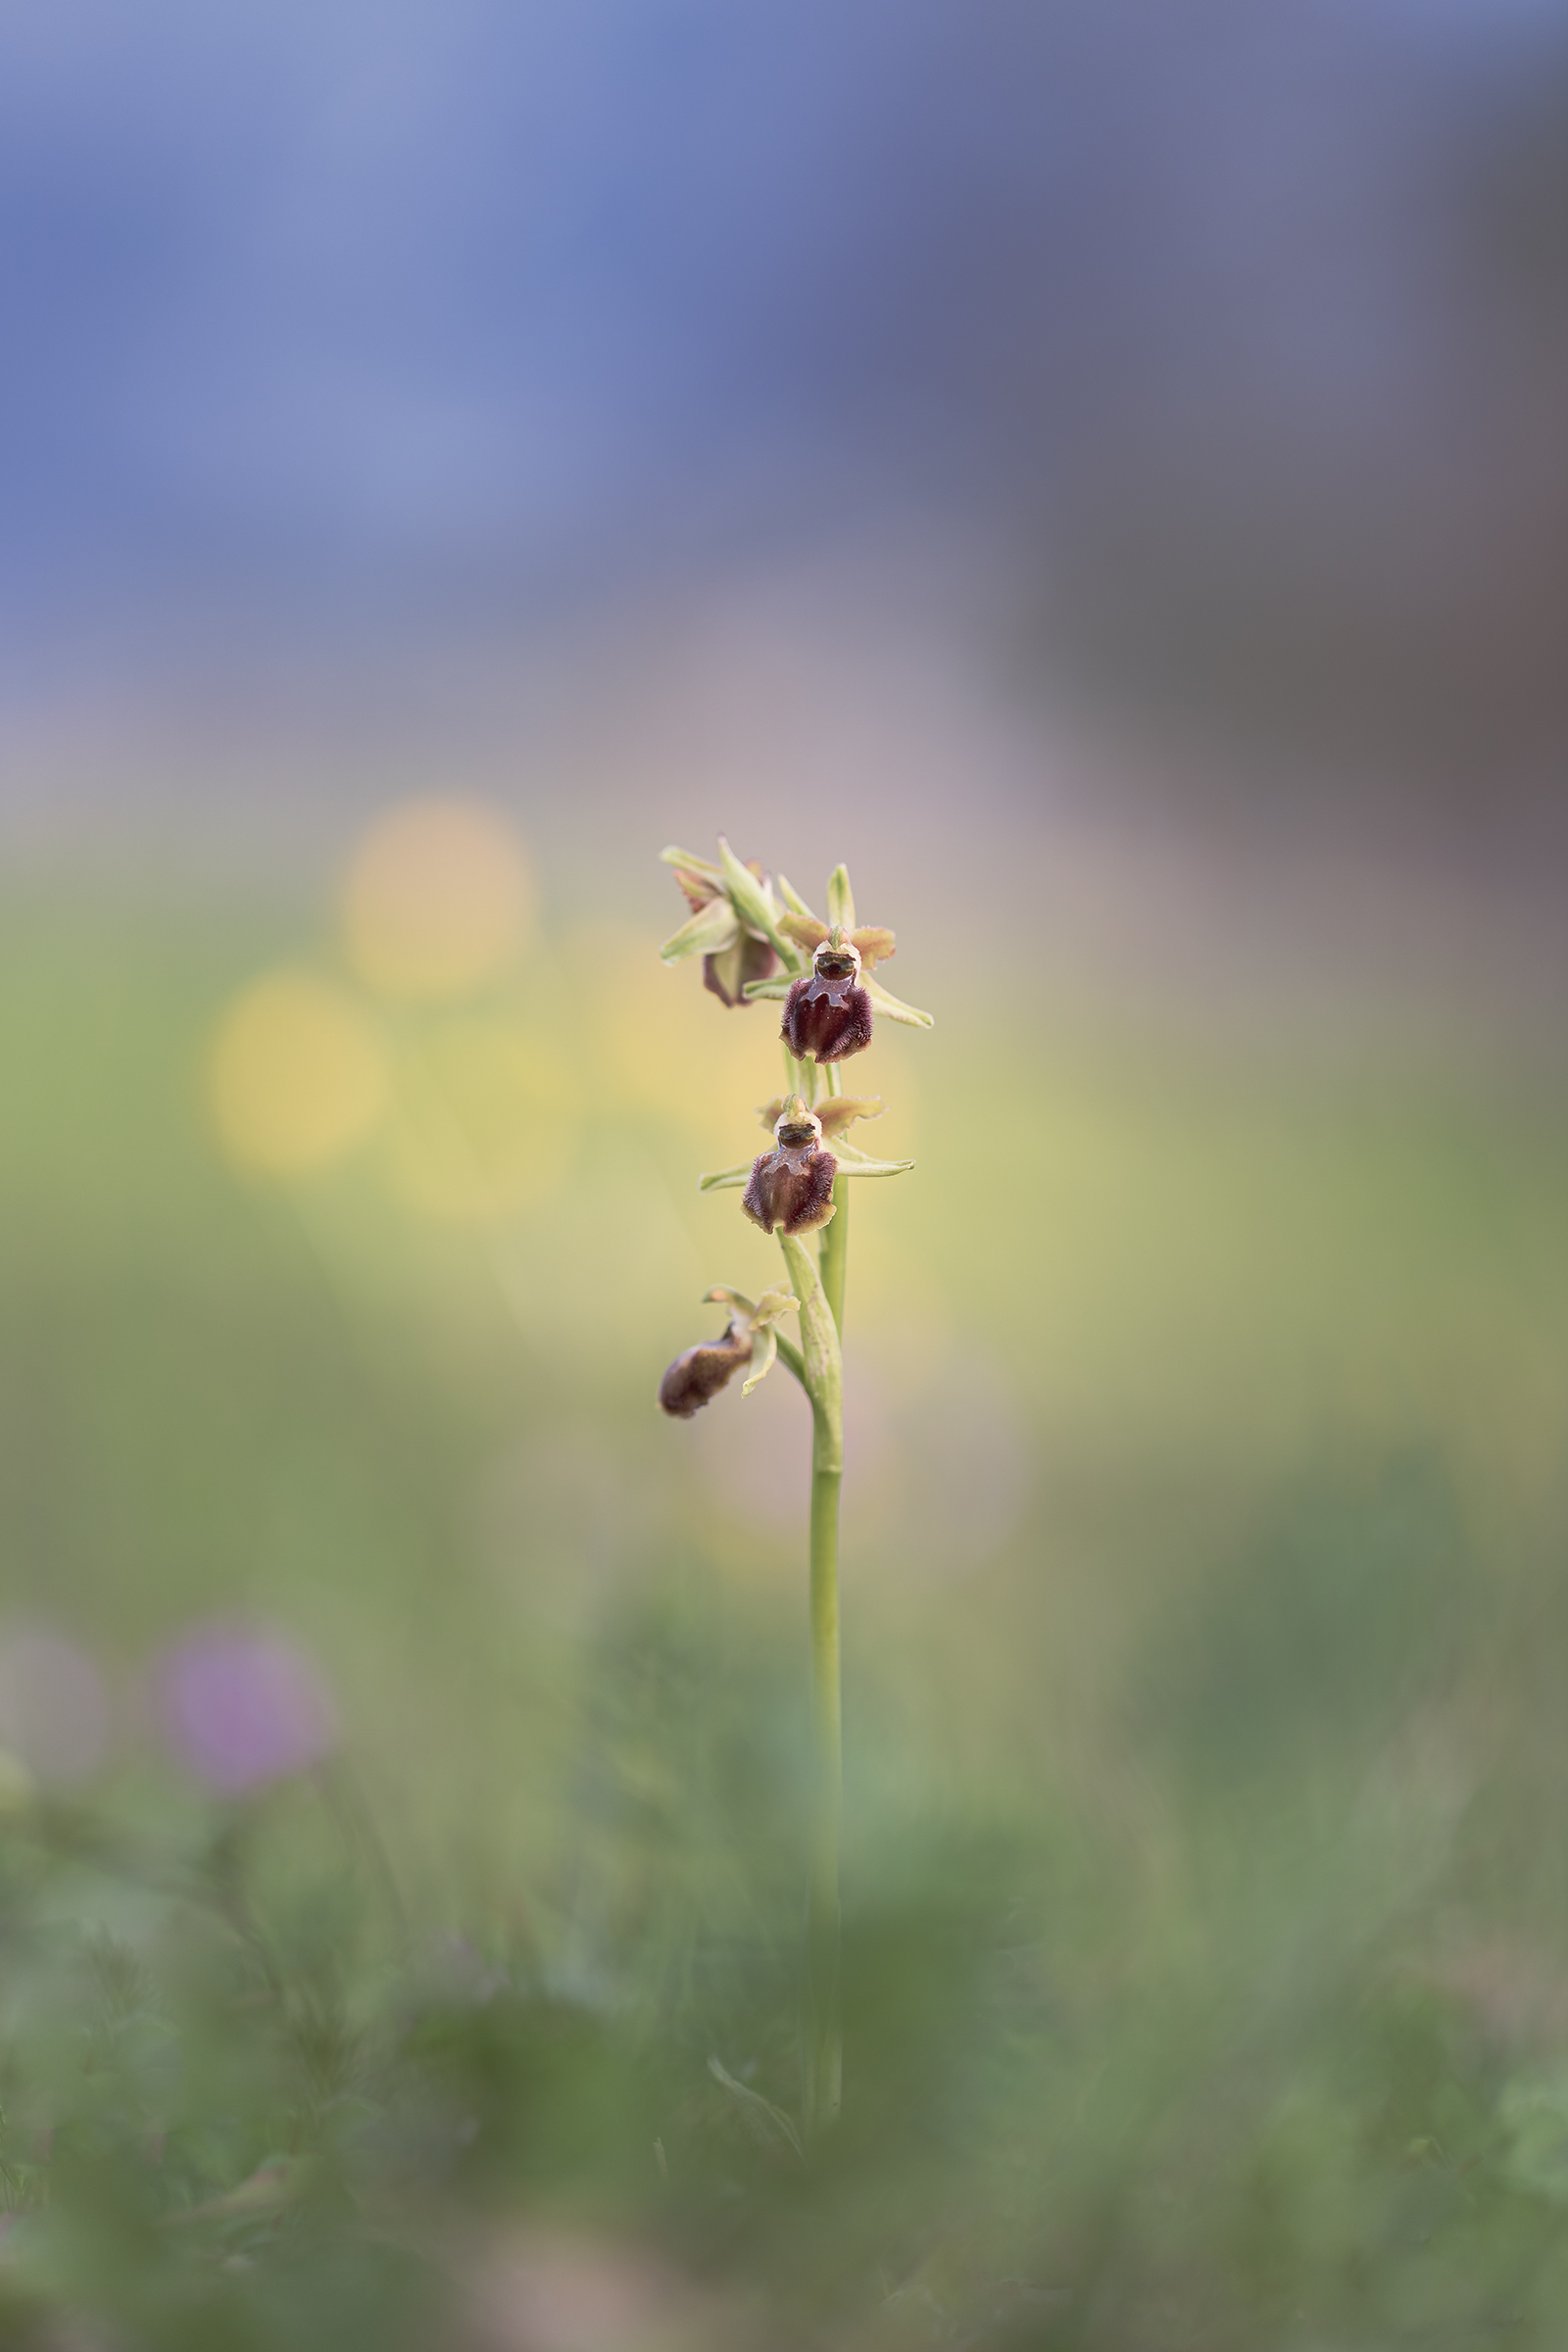 Spheogodes's ophrys ...